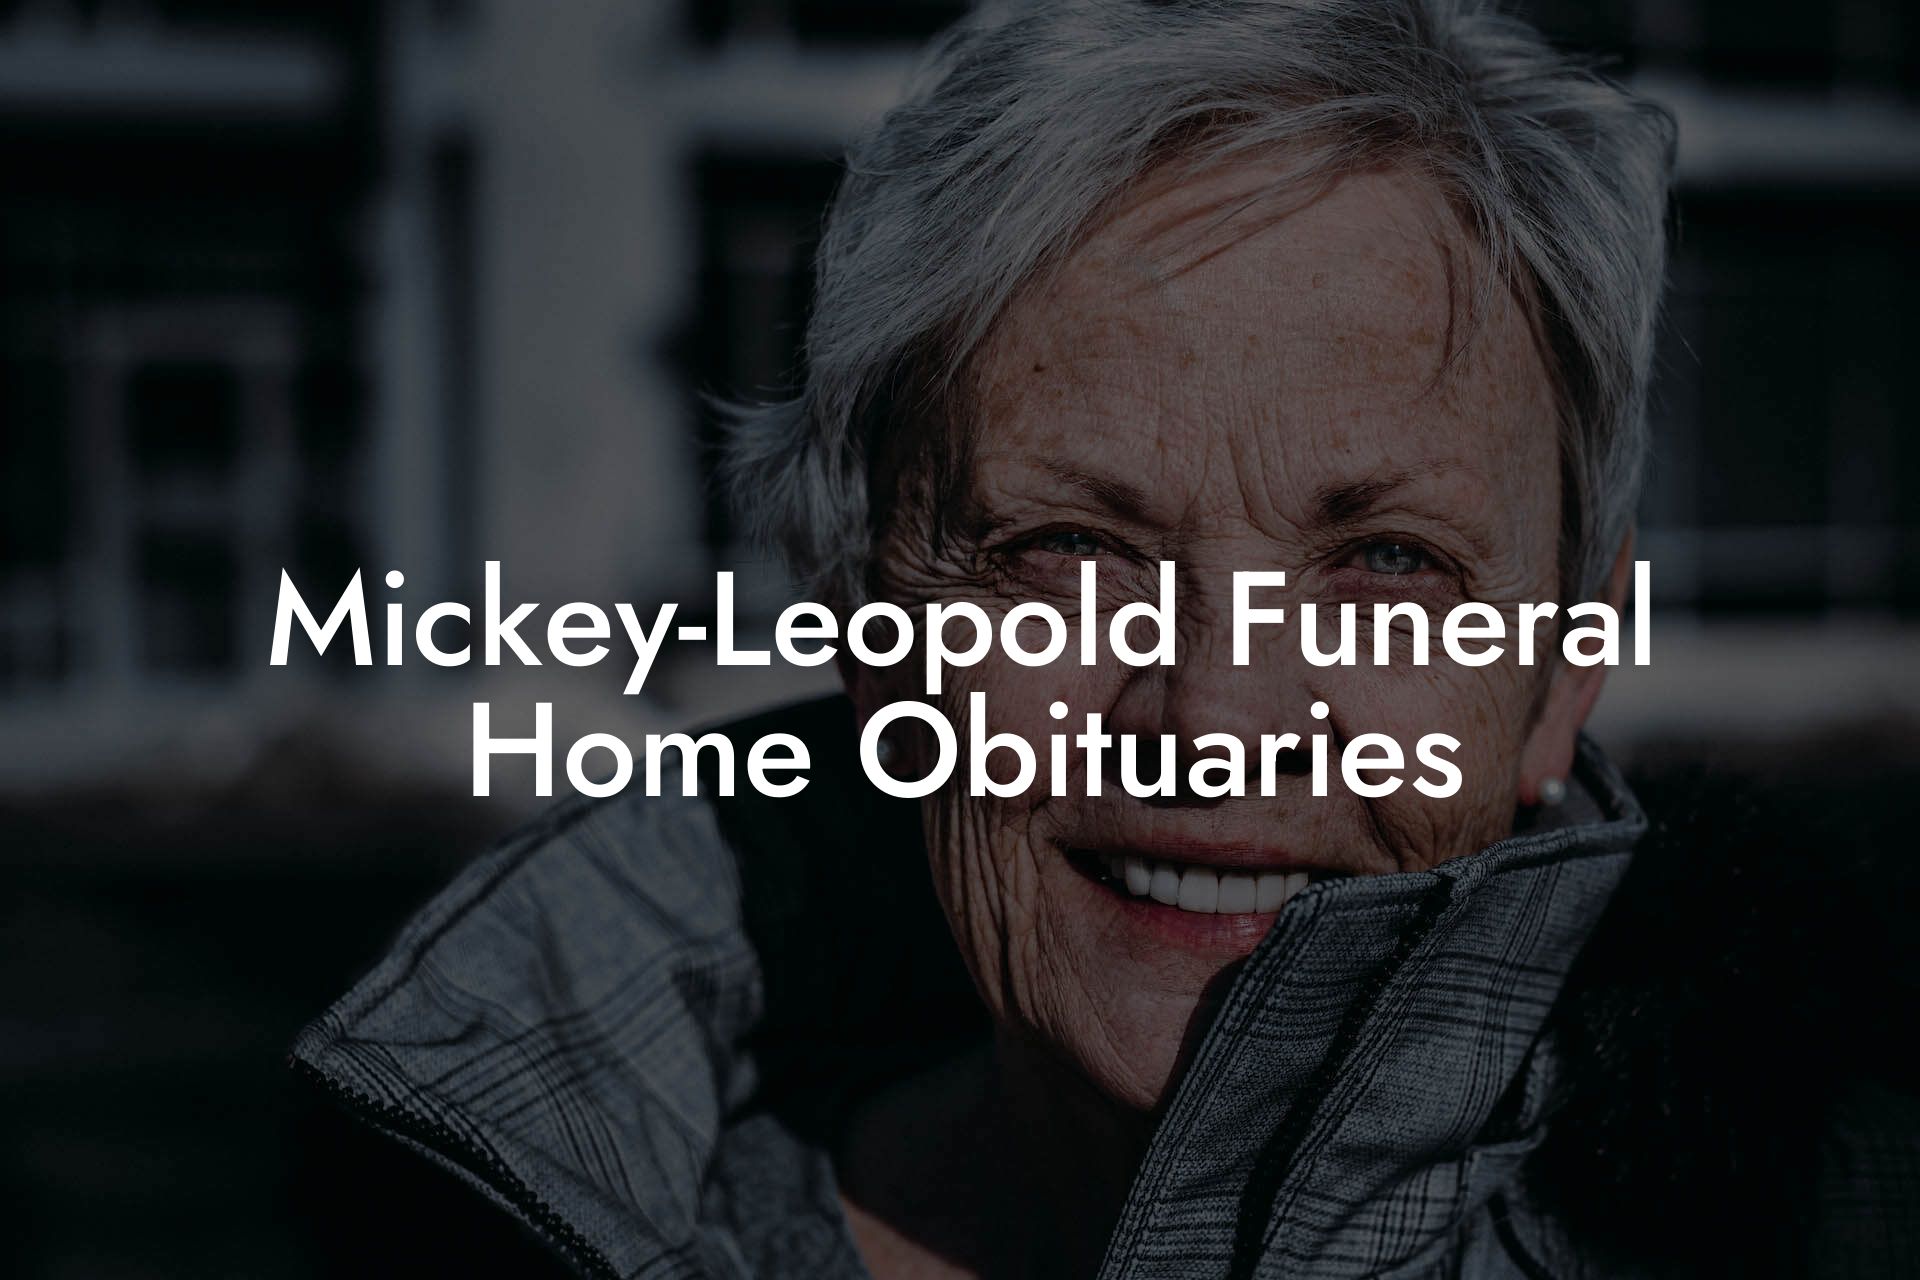 Mickey-Leopold Funeral Home Obituaries